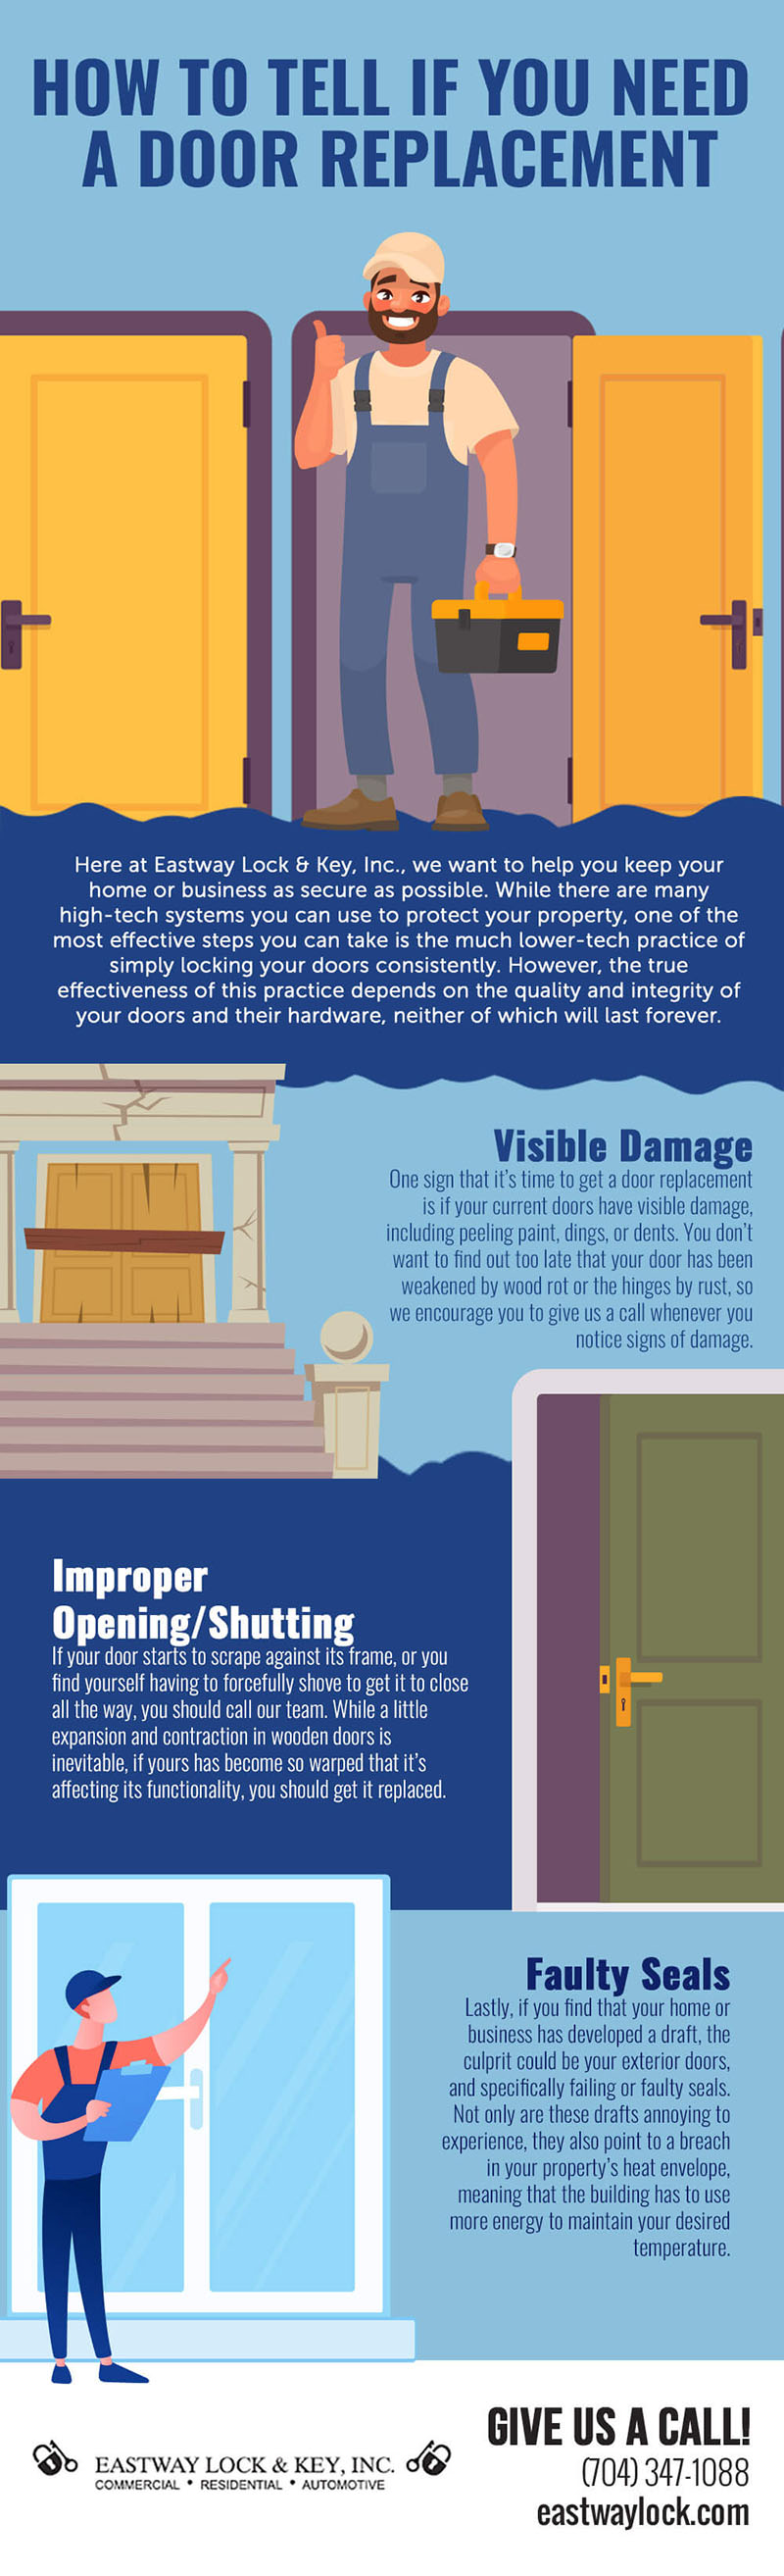 How to Tell if You Need a Door Replacement